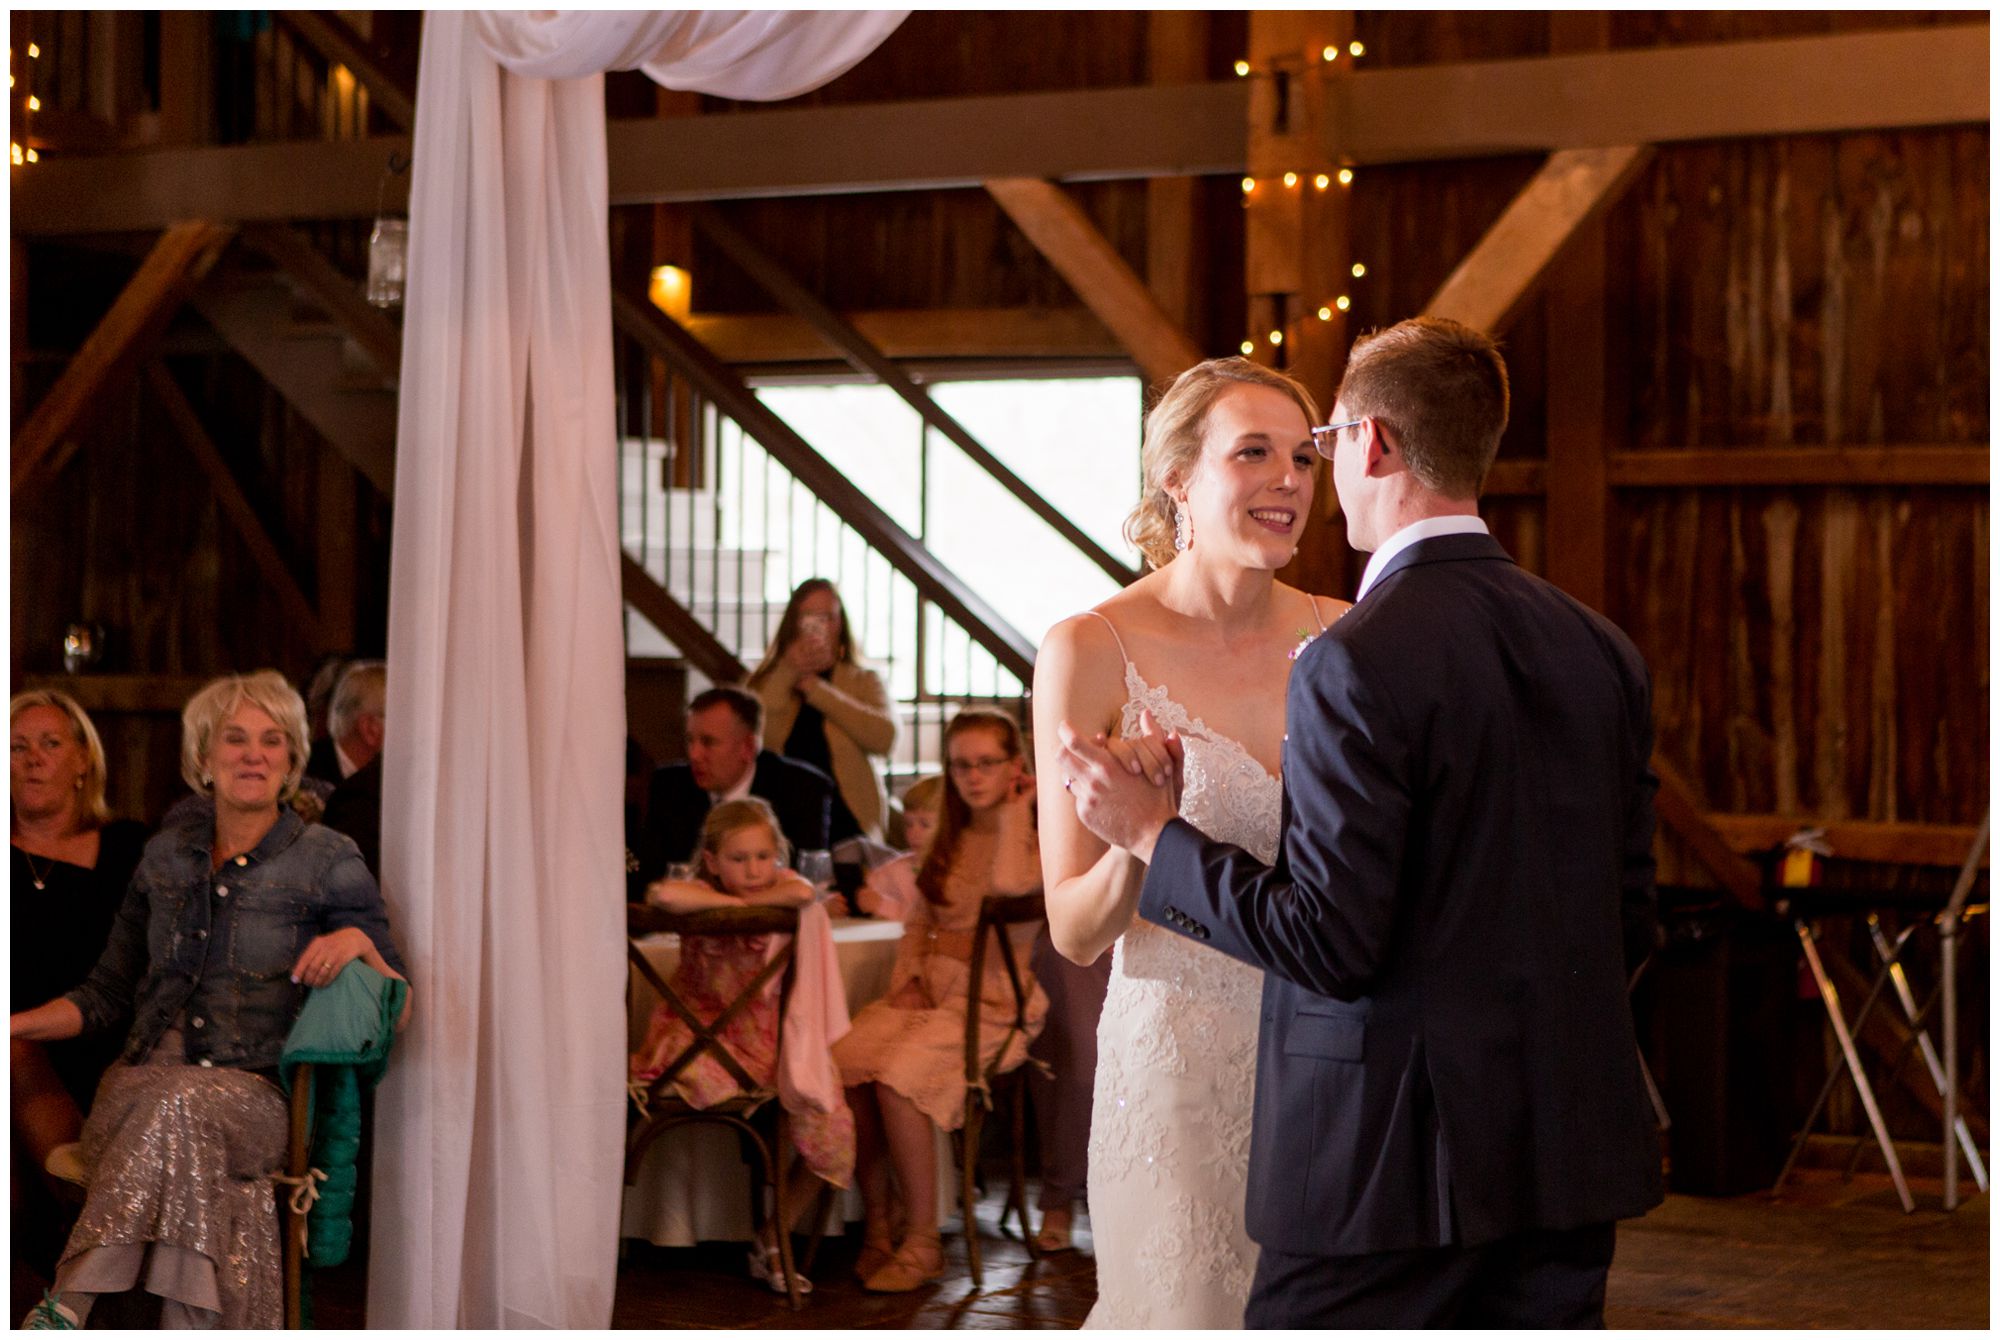 bride and groom first dance during wedding reception at Mustard Seed Gardens